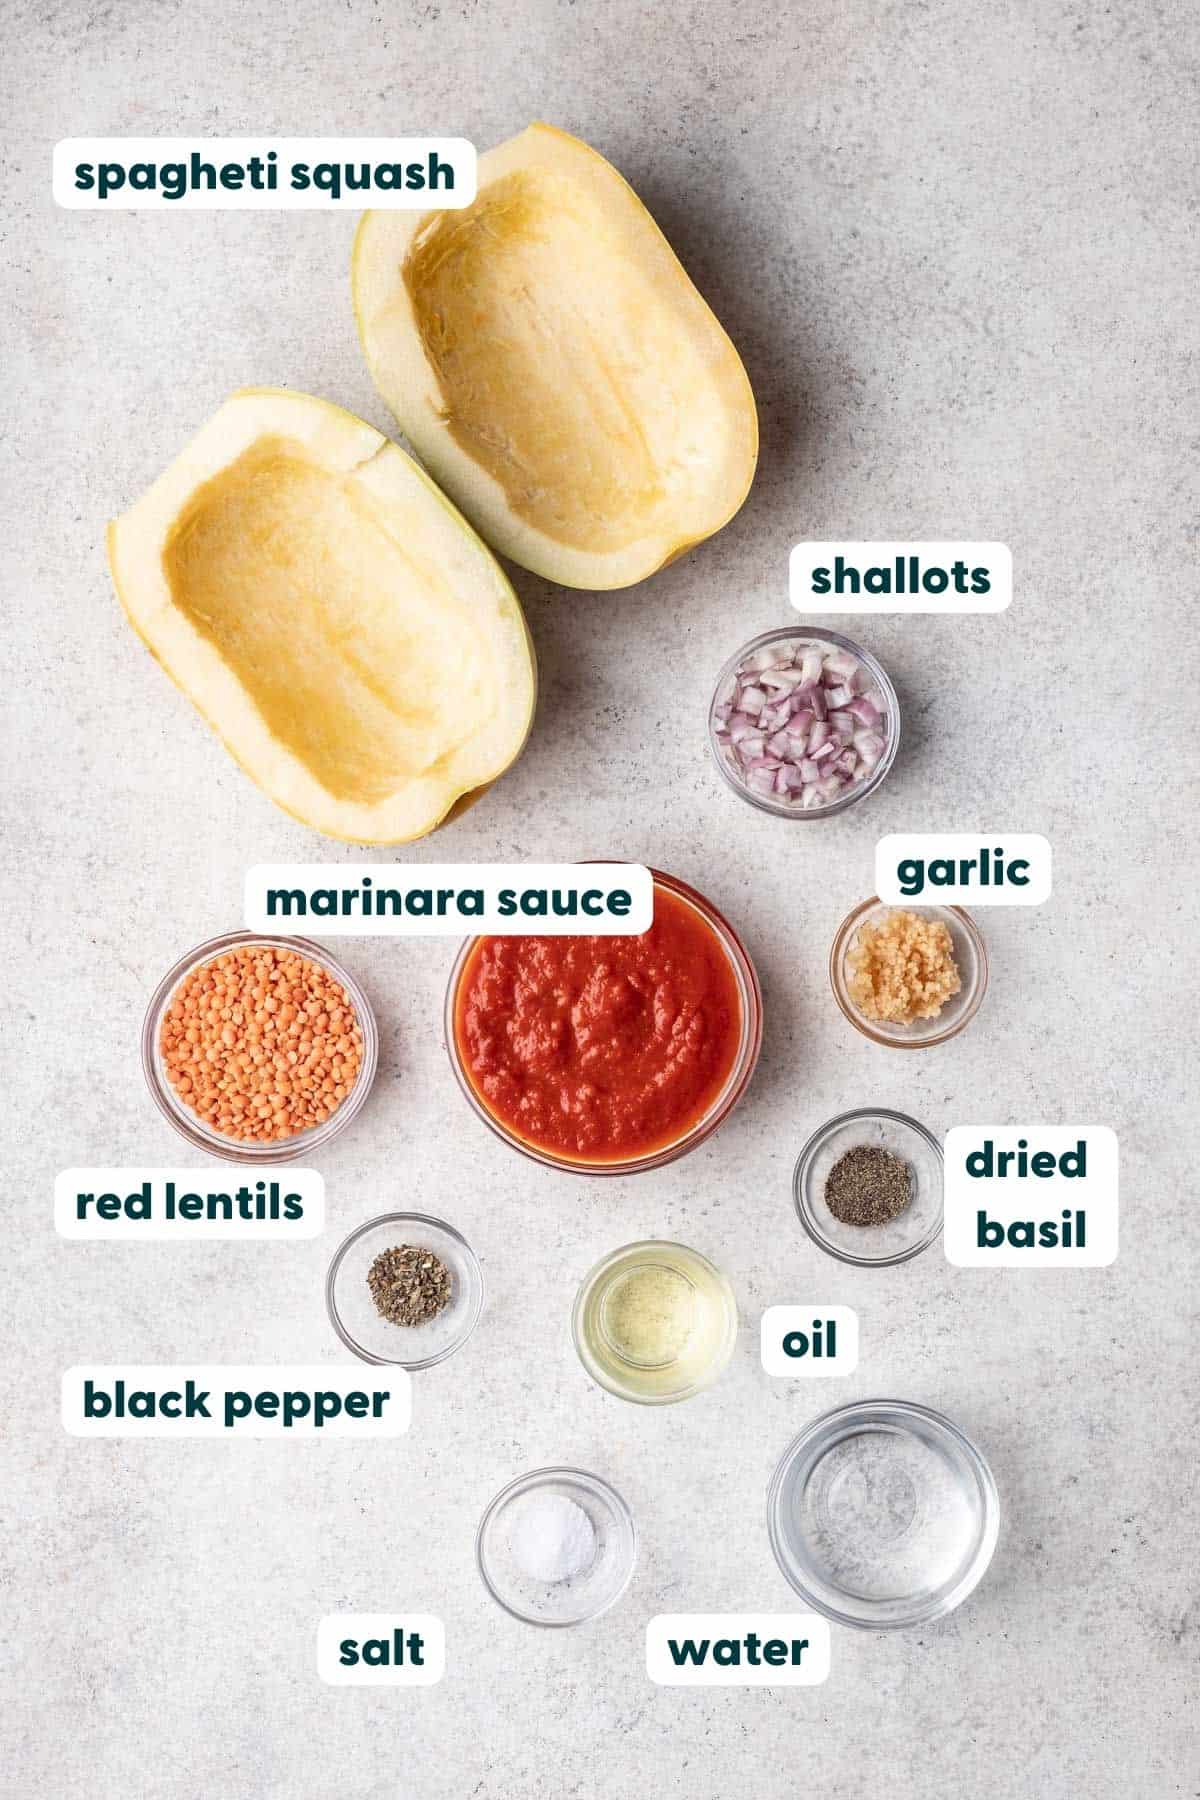 Ingredients measured and labeled to make stuffed spaghetti squash.